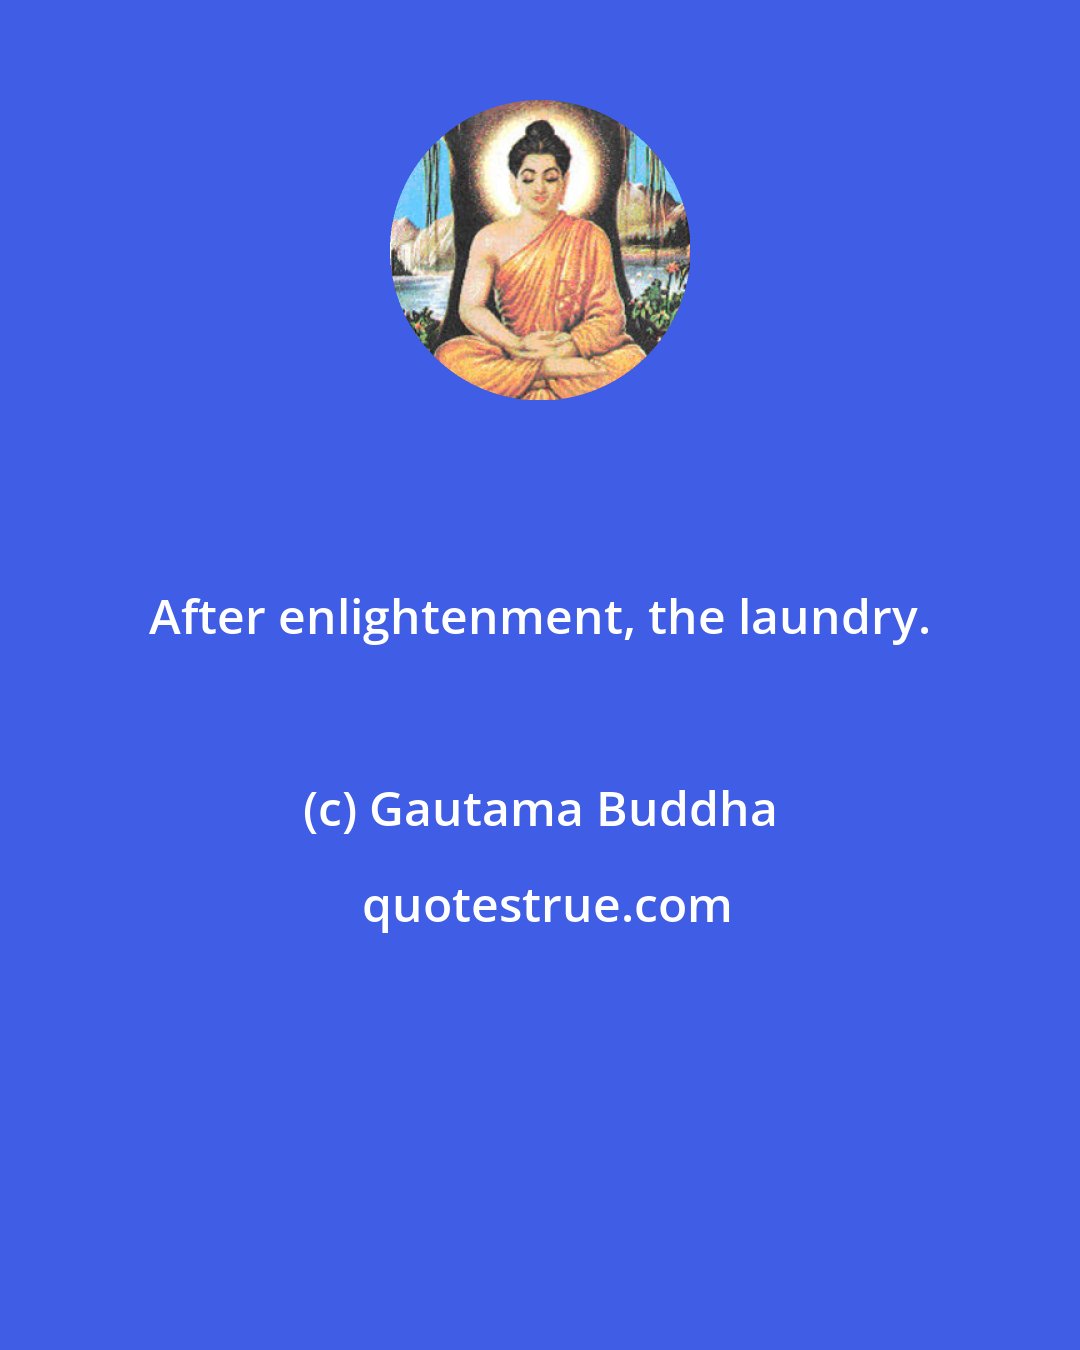 Gautama Buddha: After enlightenment, the laundry.